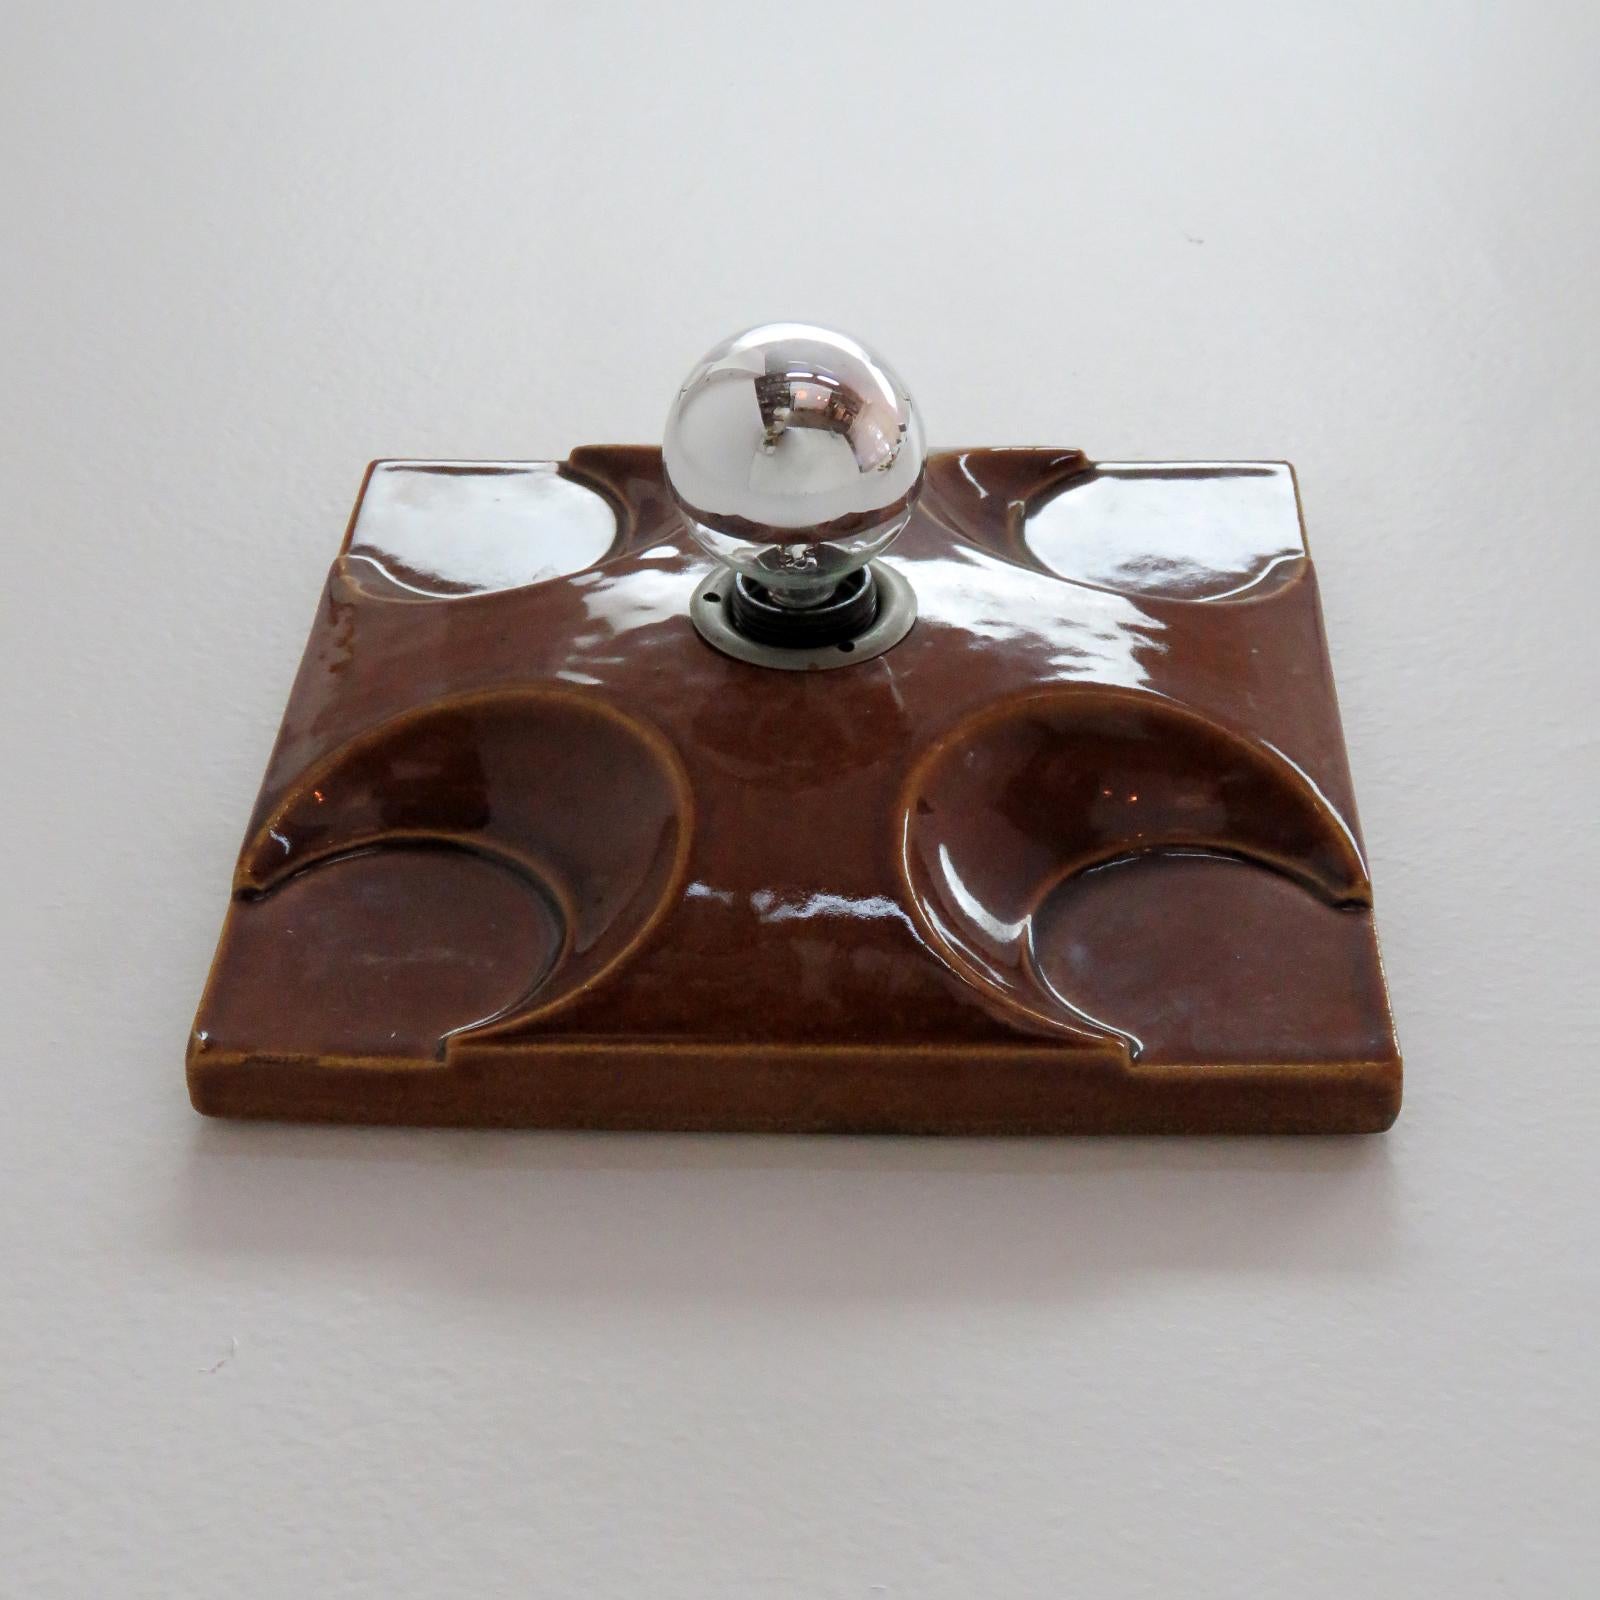 German Ceramic Wall Lights, 1960 In Good Condition For Sale In Los Angeles, CA